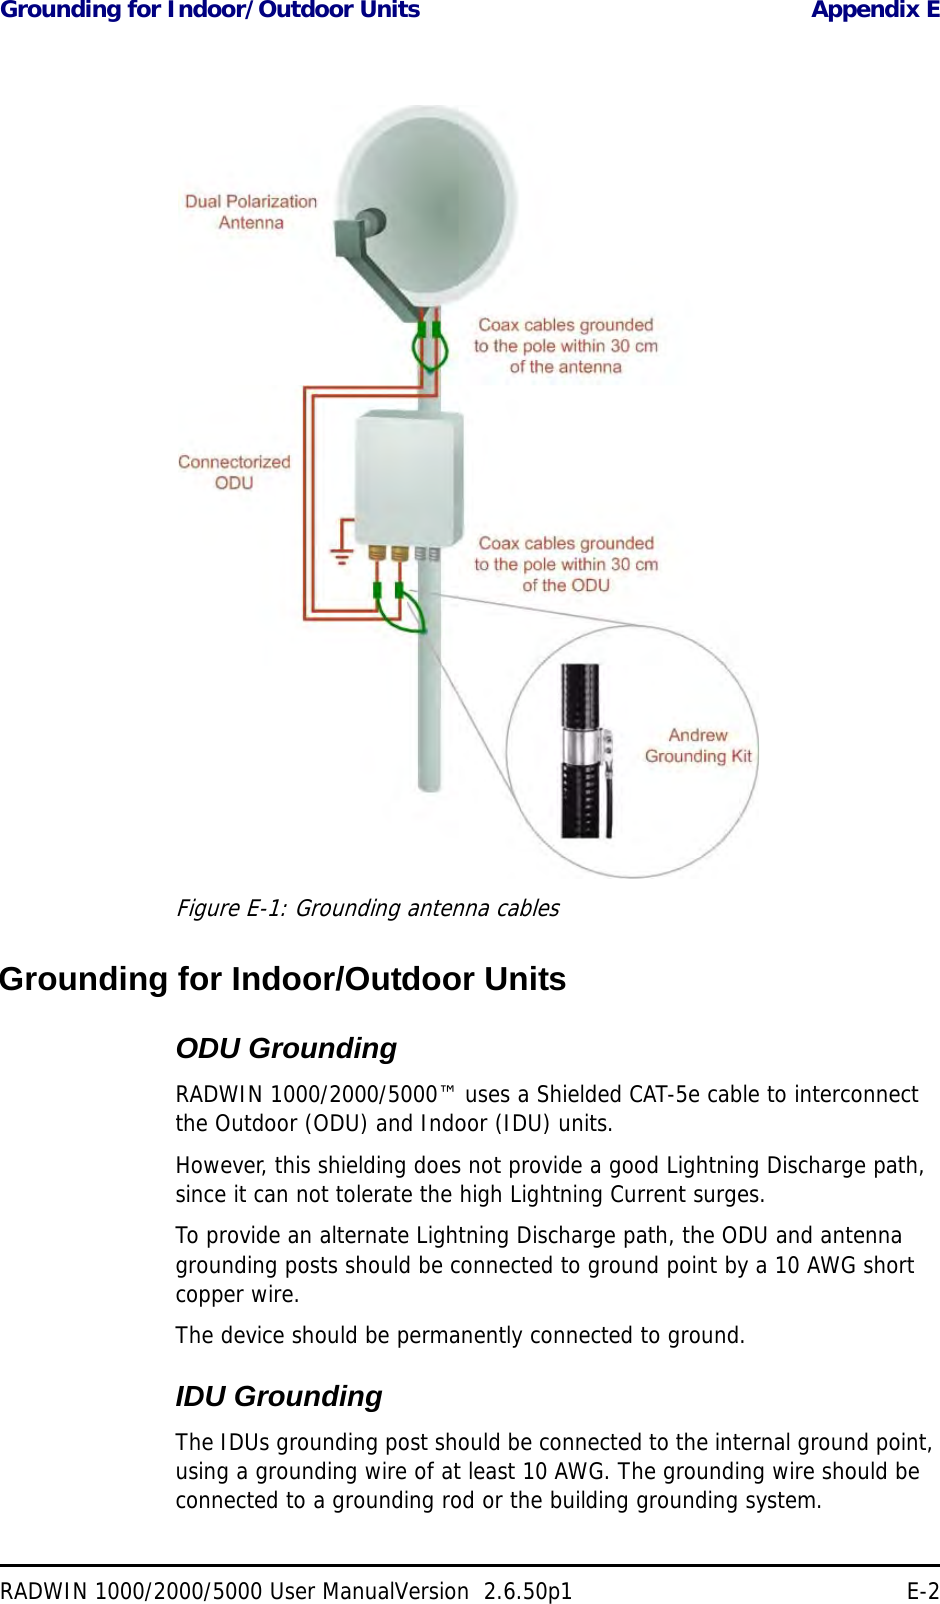 Grounding for Indoor/Outdoor Units Appendix ERADWIN 1000/2000/5000 User ManualVersion  2.6.50p1 E-2Figure E-1: Grounding antenna cablesGrounding for Indoor/Outdoor UnitsODU GroundingRADWIN 1000/2000/5000™ uses a Shielded CAT-5e cable to interconnect the Outdoor (ODU) and Indoor (IDU) units. However, this shielding does not provide a good Lightning Discharge path, since it can not tolerate the high Lightning Current surges.To provide an alternate Lightning Discharge path, the ODU and antenna grounding posts should be connected to ground point by a 10 AWG short copper wire.The device should be permanently connected to ground.IDU GroundingThe IDUs grounding post should be connected to the internal ground point, using a grounding wire of at least 10 AWG. The grounding wire should be connected to a grounding rod or the building grounding system.